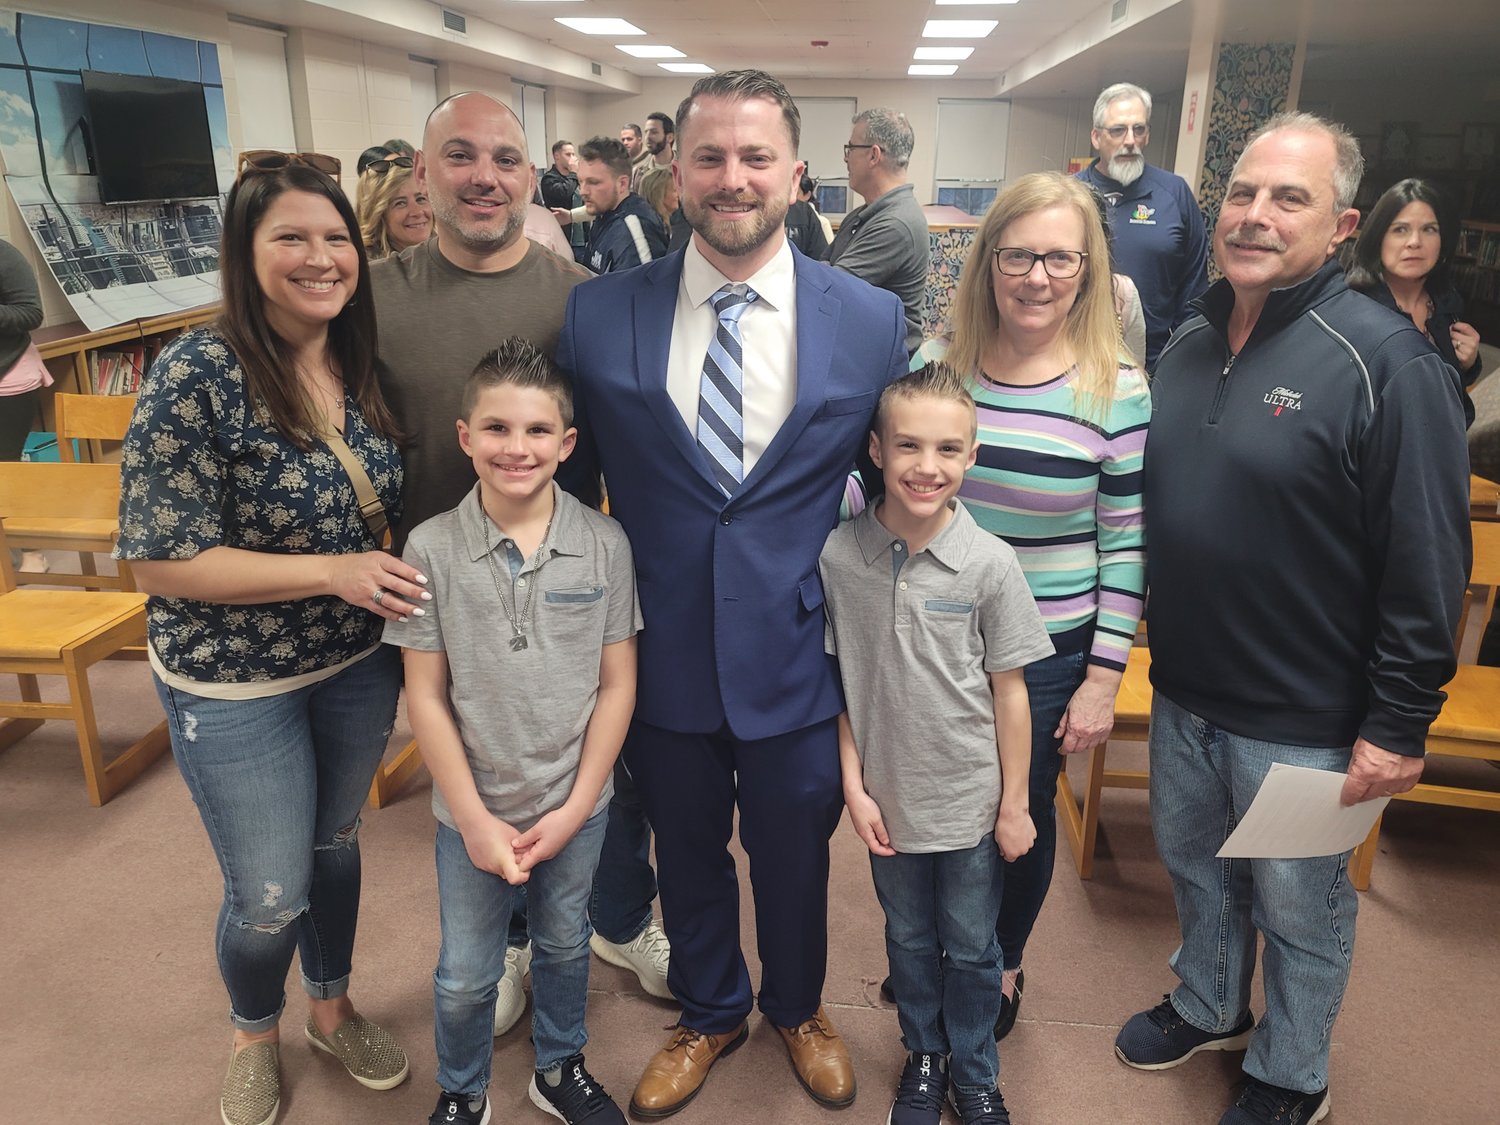 FAMILY SUPPORT: Matt Velino, center, is surrounded by his family after Tuesday night’s Johnston School Committee meeting, where he was officially named new JHS principal. From left to right: Stacy Andreozzi, Dave Andreozzi, Luca Andreozzi (a Brown Avenue Elementary student), Matt Velino, Mason Andreozzi (also a Brown Ave. student), Lori Velino and Paul Velino.